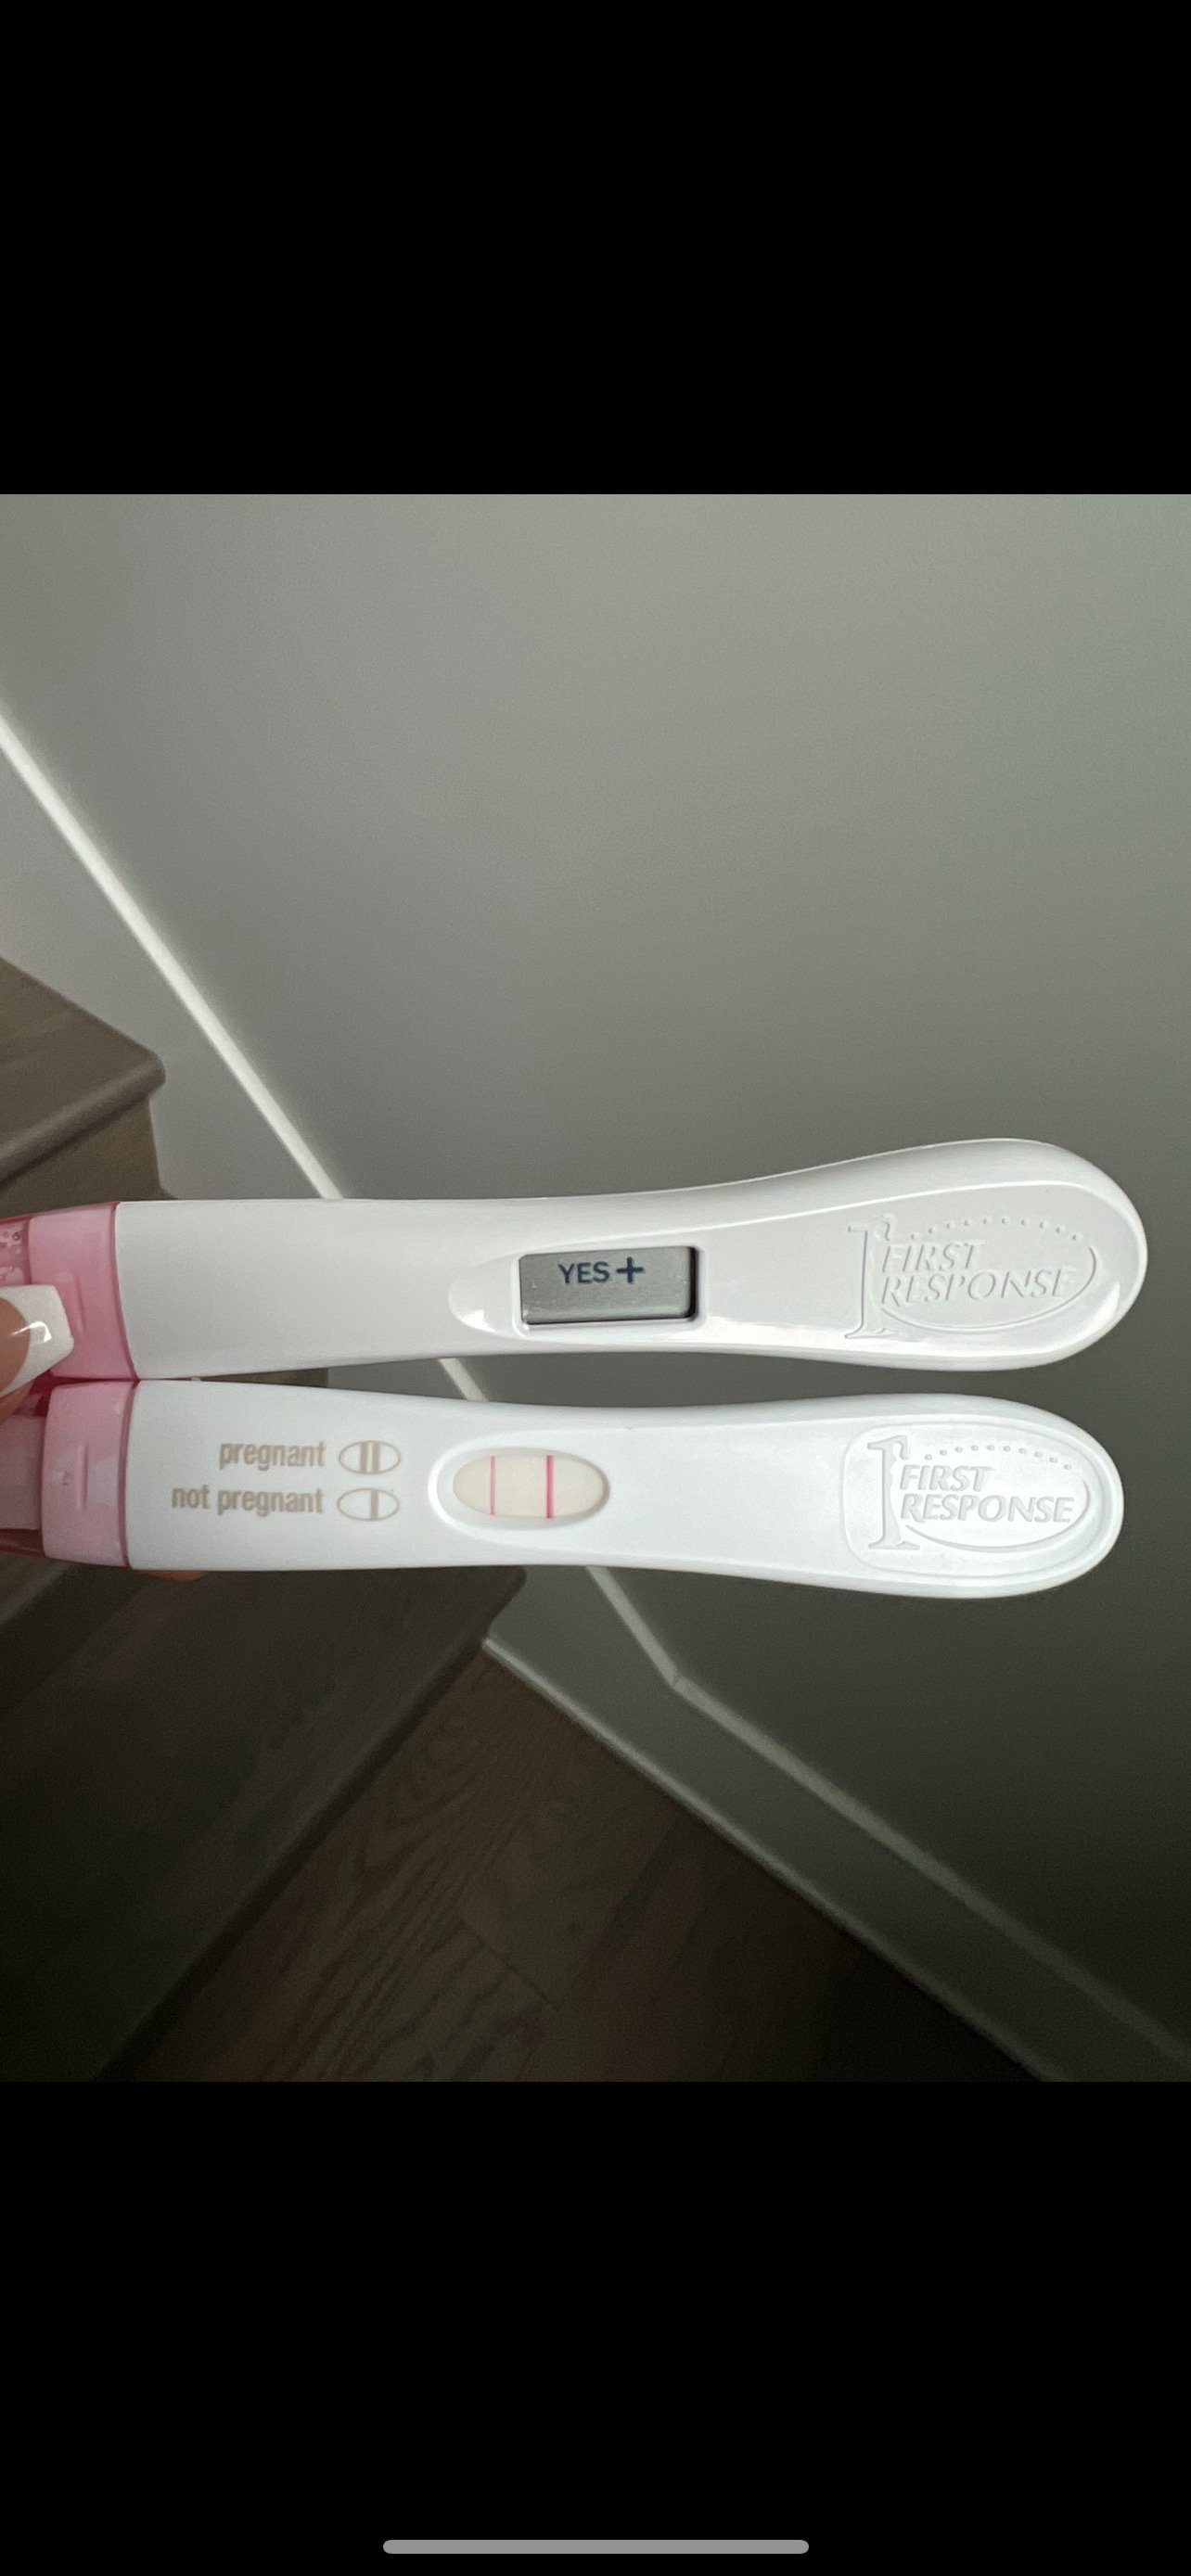  SuJok acupuncture treatment based in Vancouver at Alla Ozerova acupuncture clinic used to treat Fertility. Picture of patient’s positive pregnancy test. 